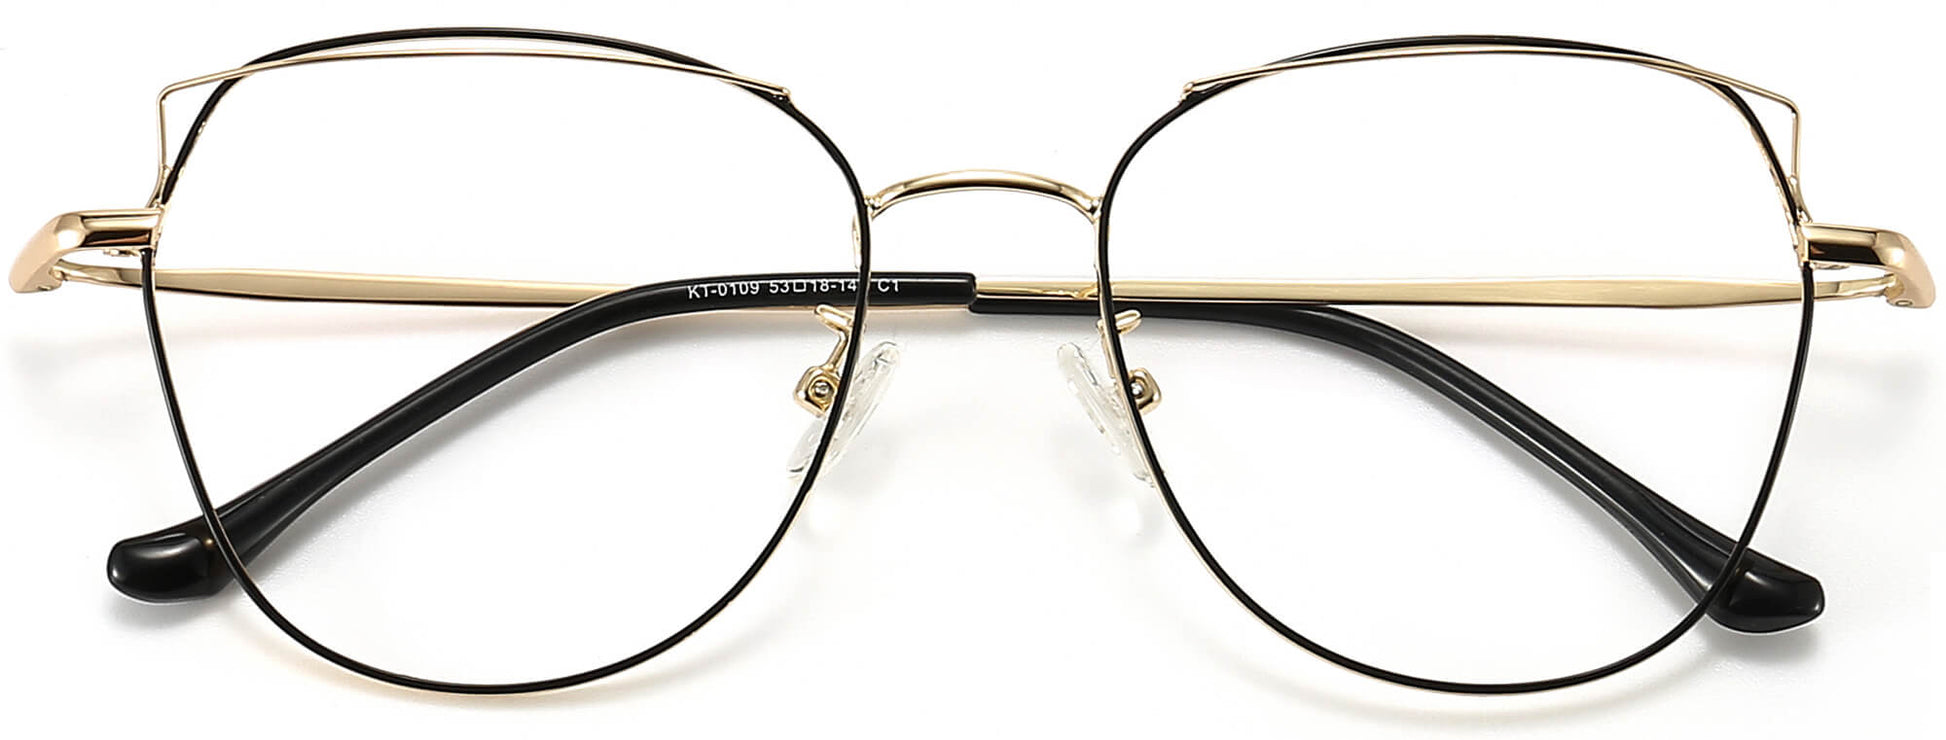 Dream Cateye Gold Eyeglasses from ANRRI, closed view